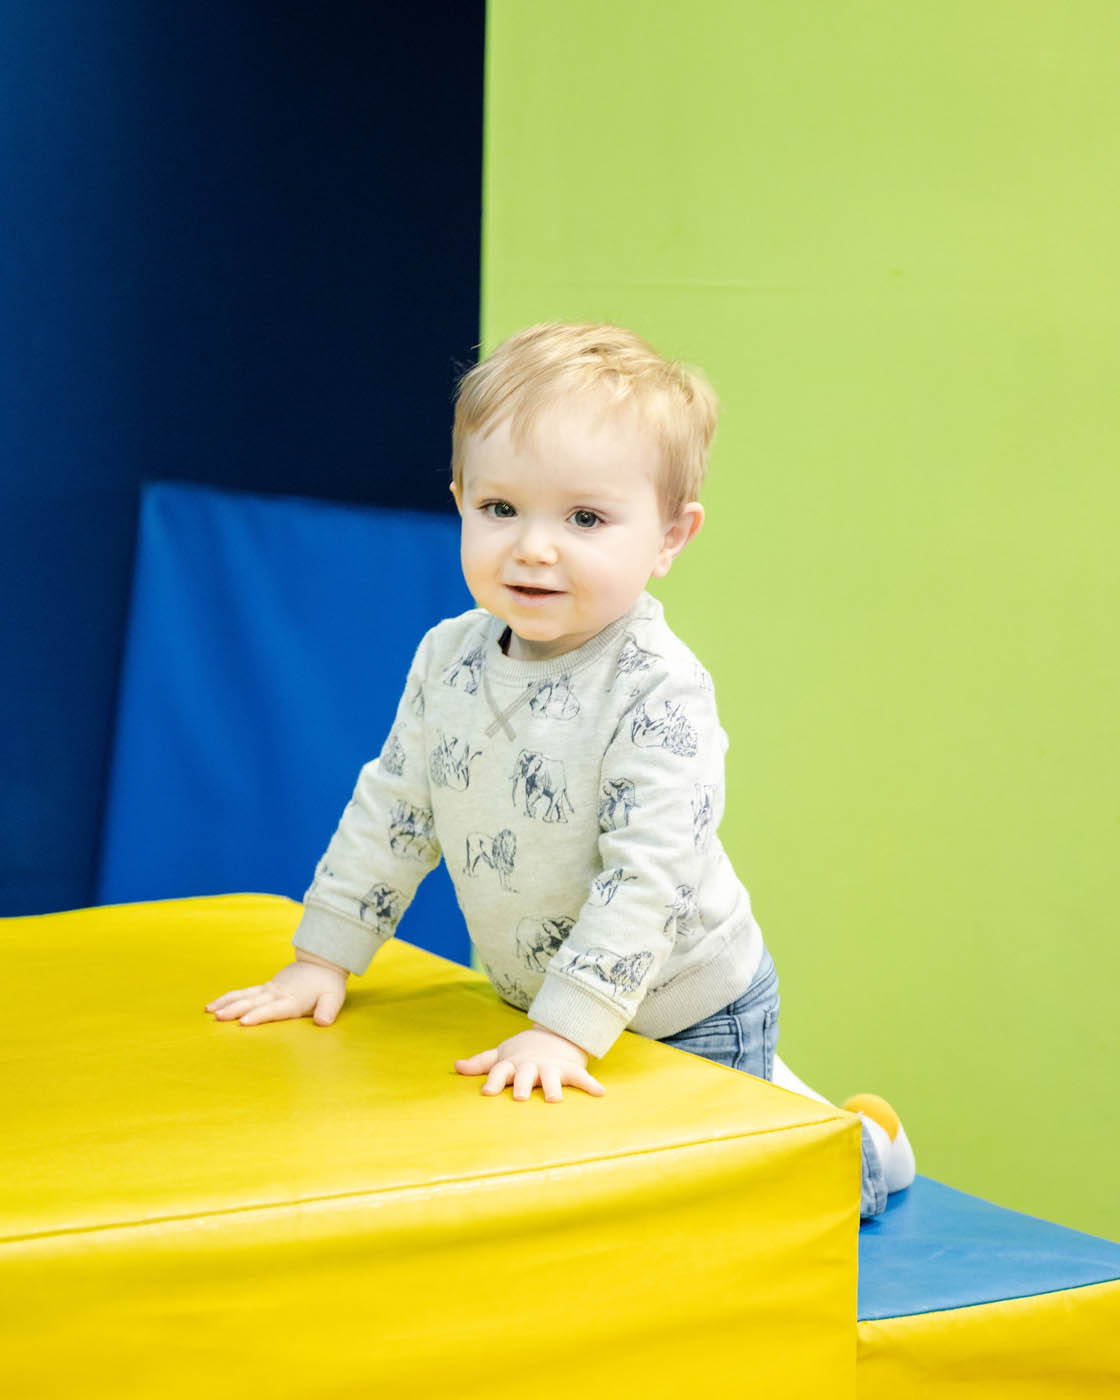 A young boy climbing on some age appropriate gym equipment at a Katy toddler tumbling class.